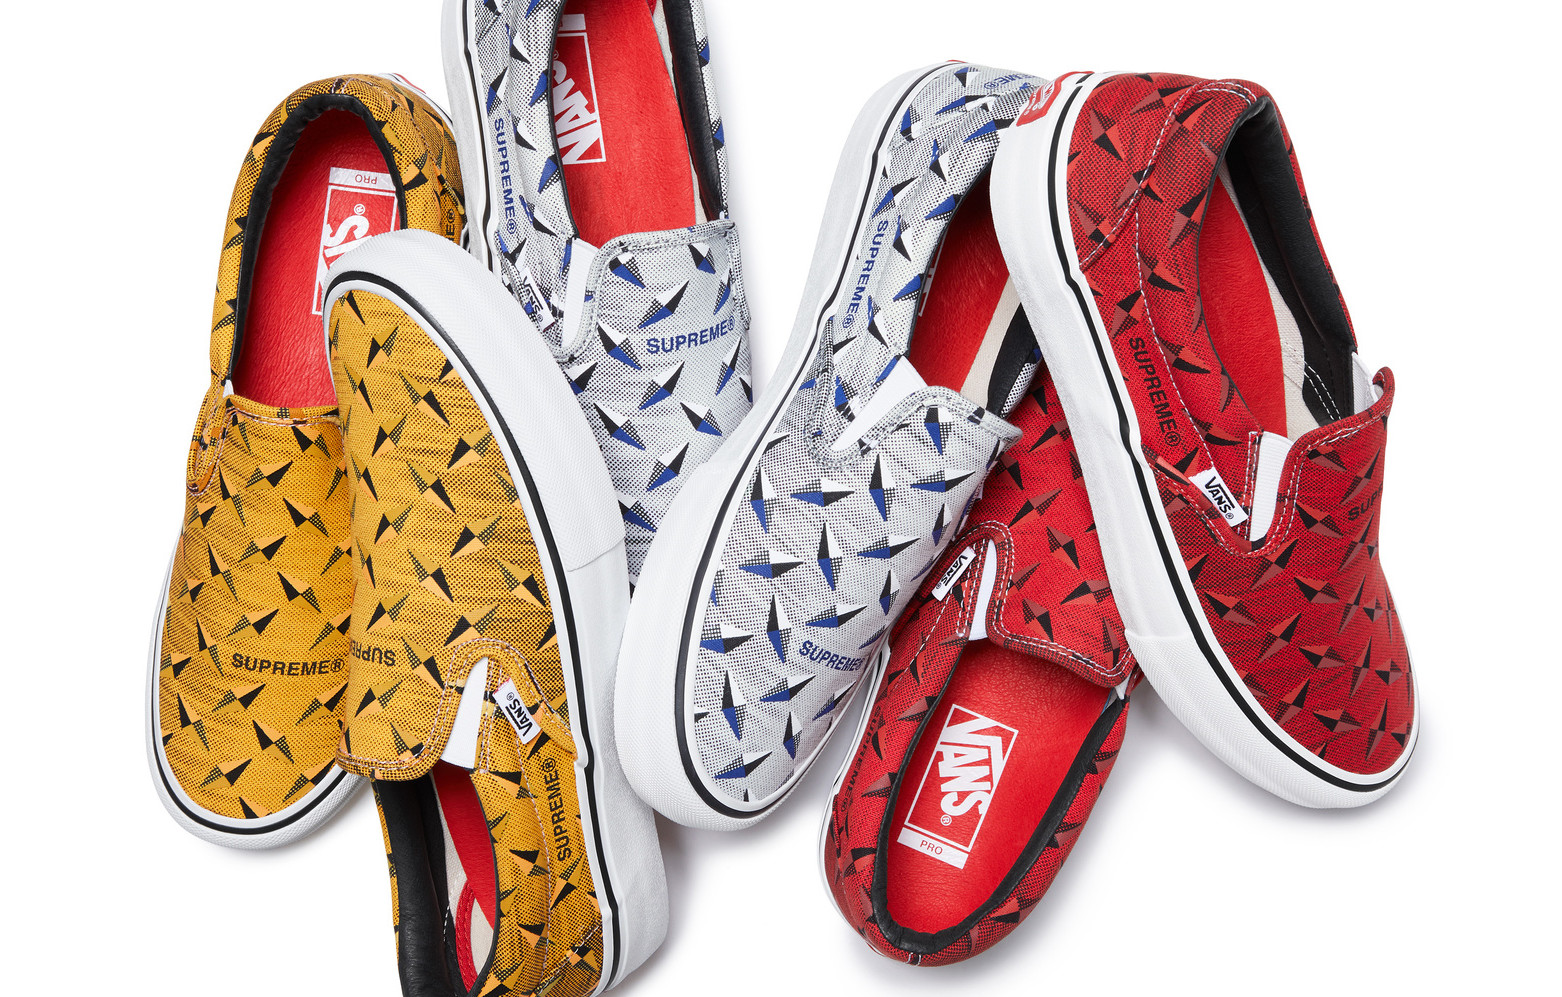 Supreme Just Gave 2 Low-Key Vans Sneakers a High-End Upgrade